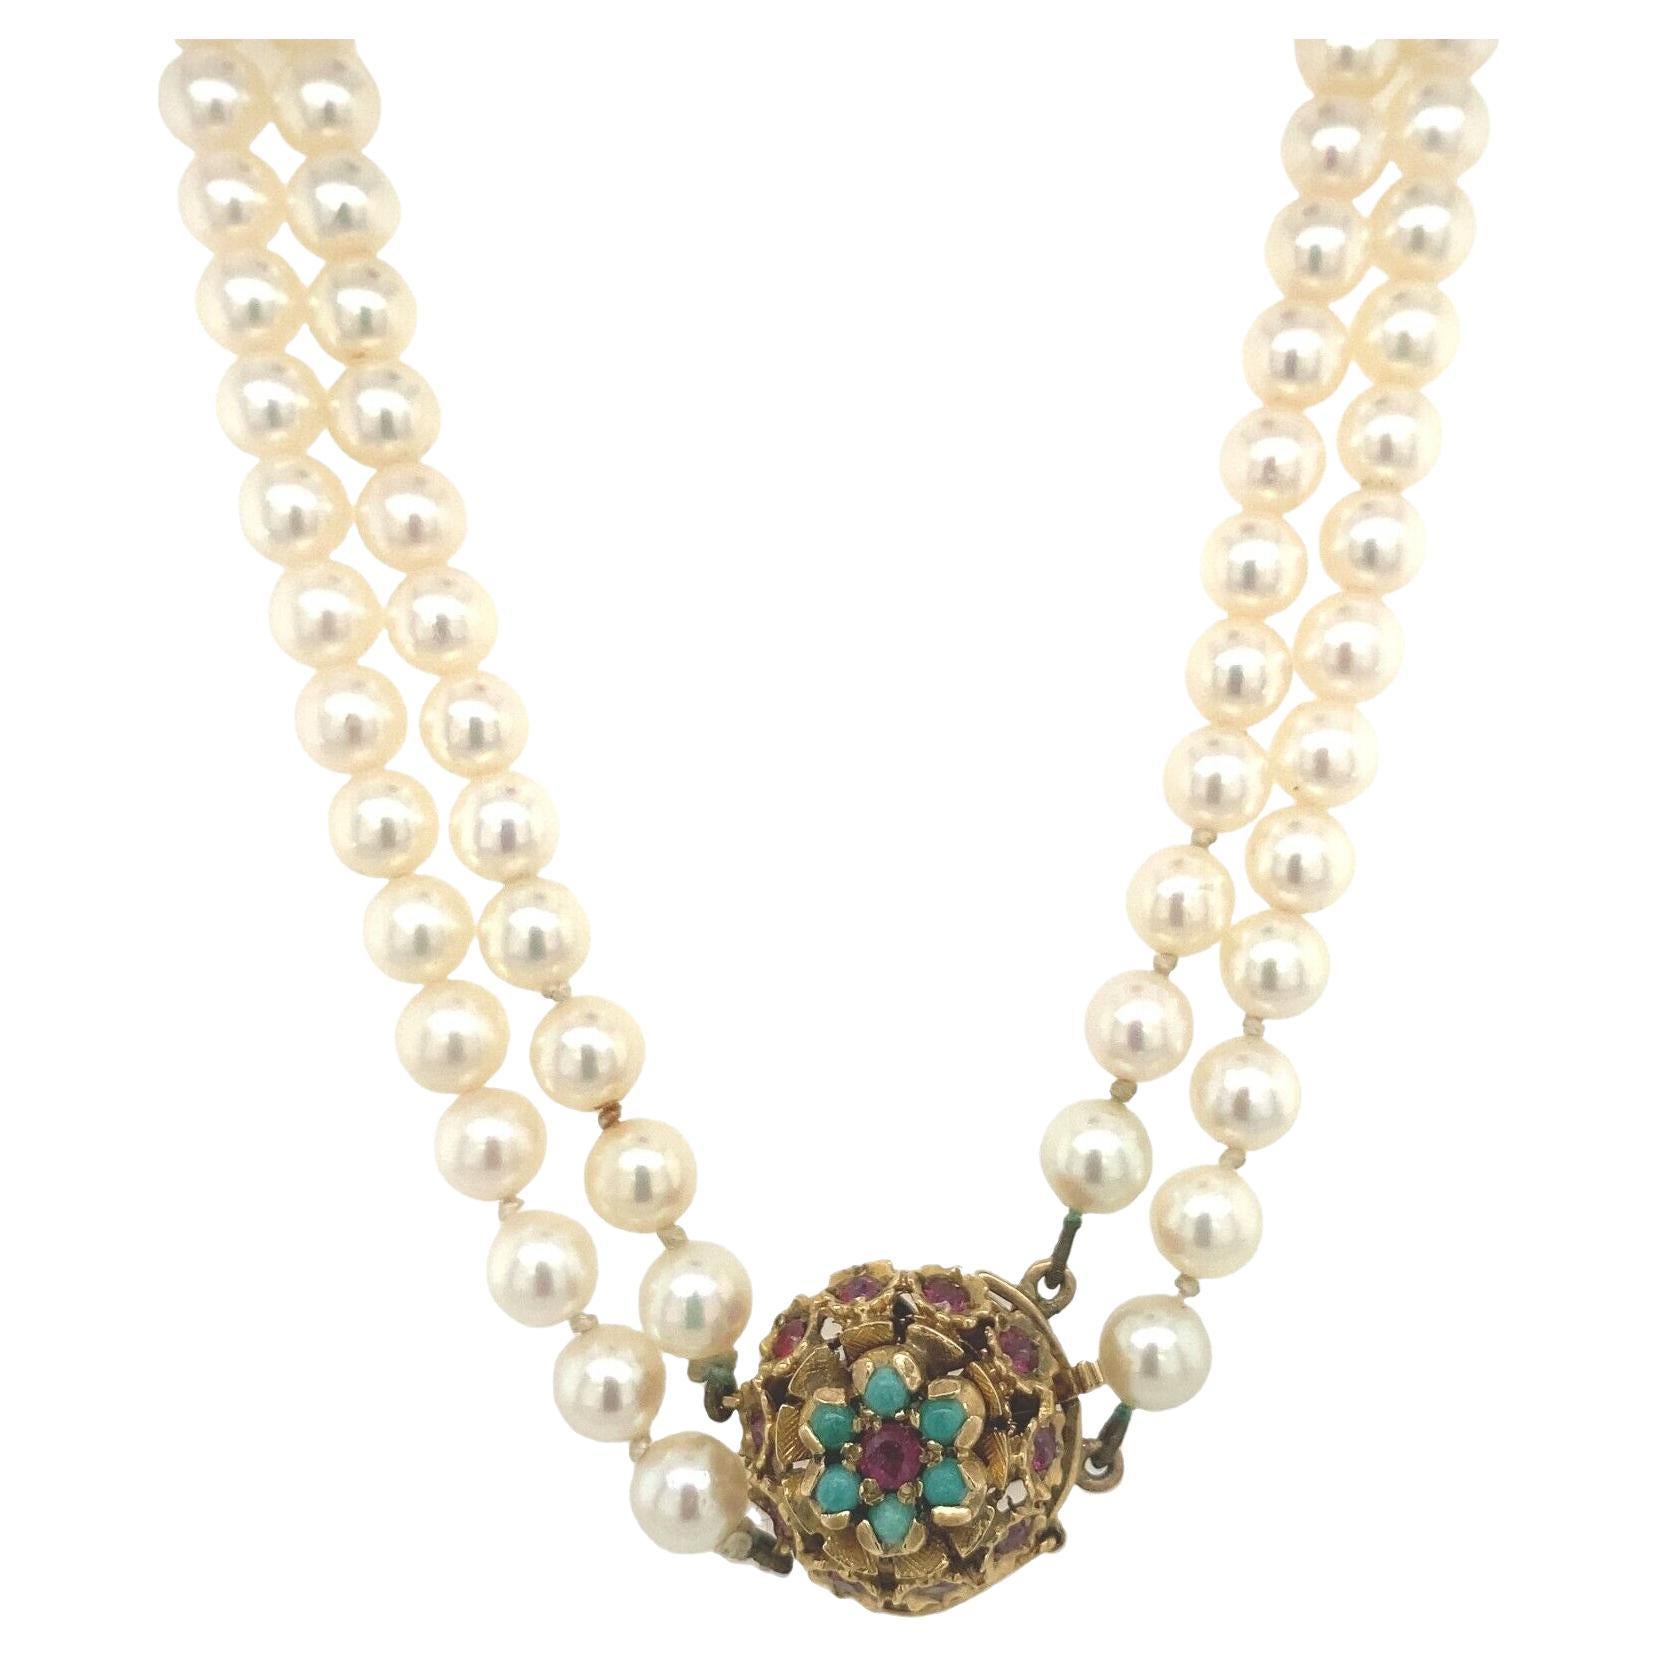 2 Row Uniform Cultured Pearl Necklace, With 9ct Gold Coloured Stone Clasp